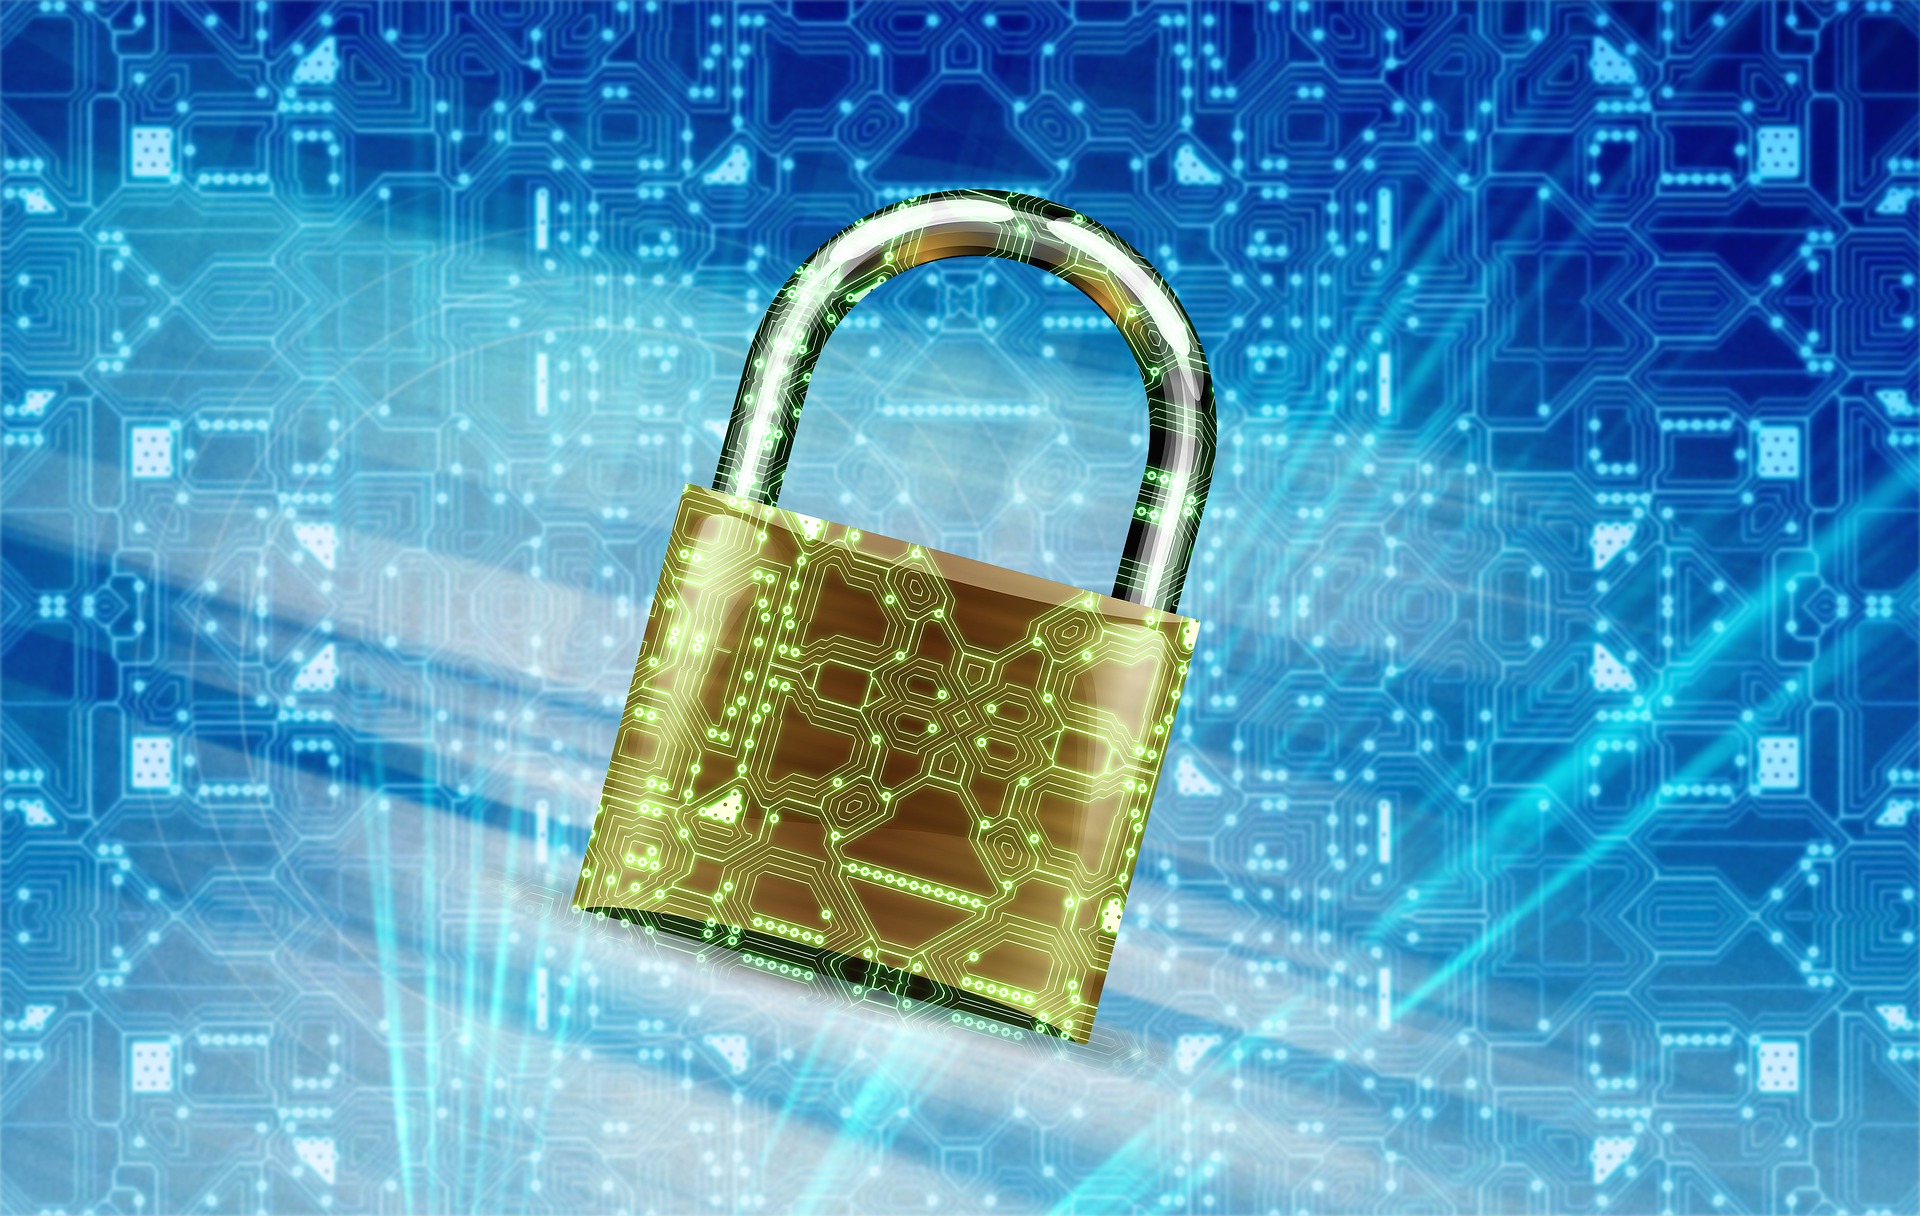 example image of data security